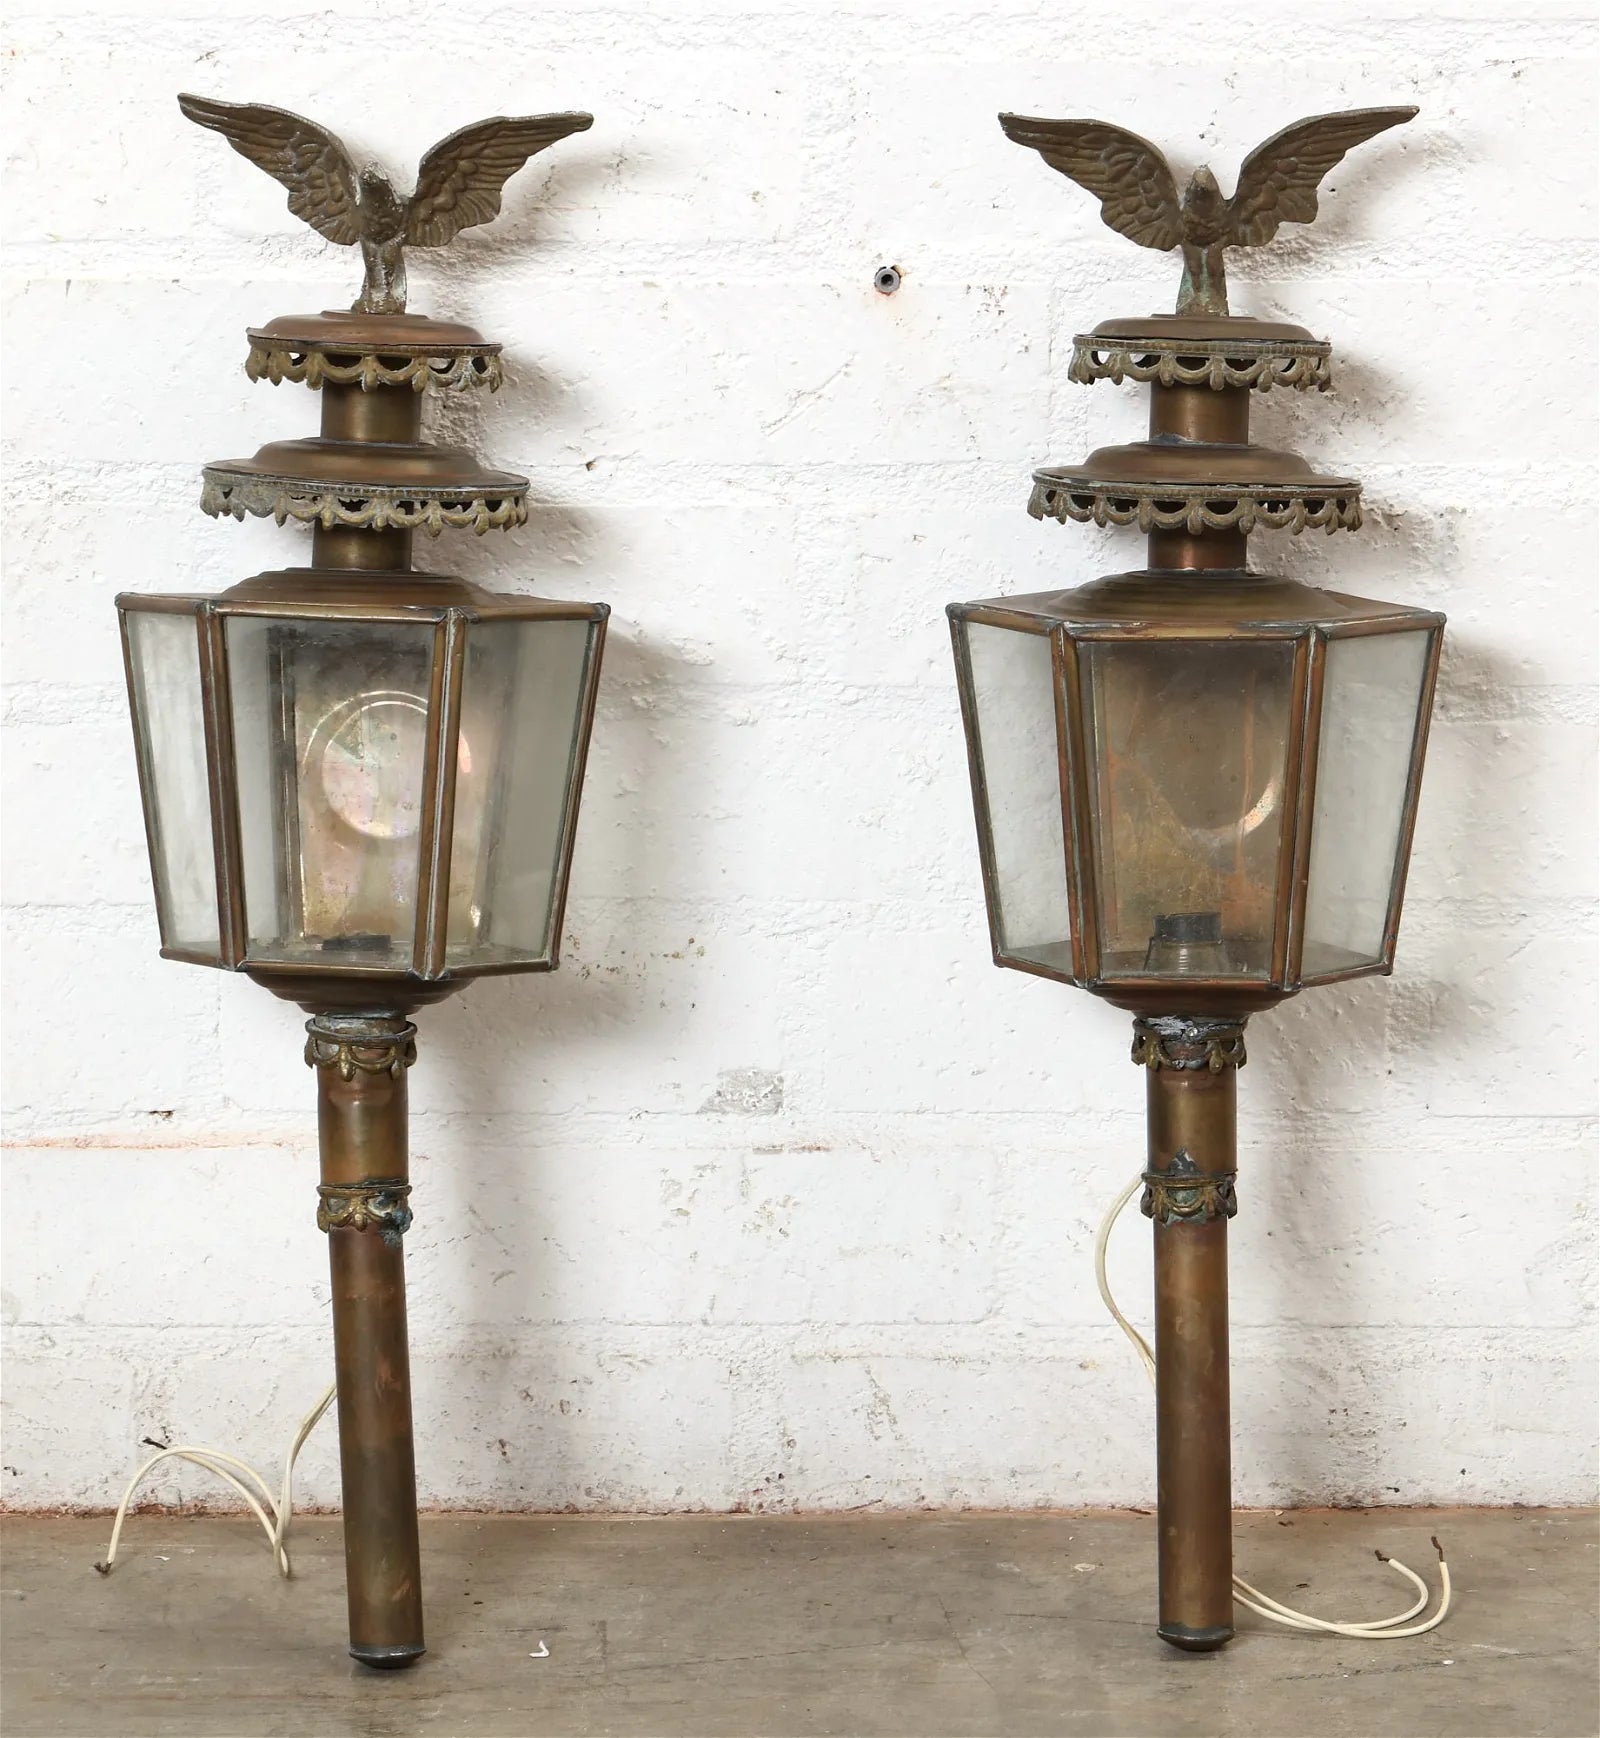 AL3-006: Pair of Early 19th Century American Federal Coach Lanterns Converted to Electric Outdoor Sconces